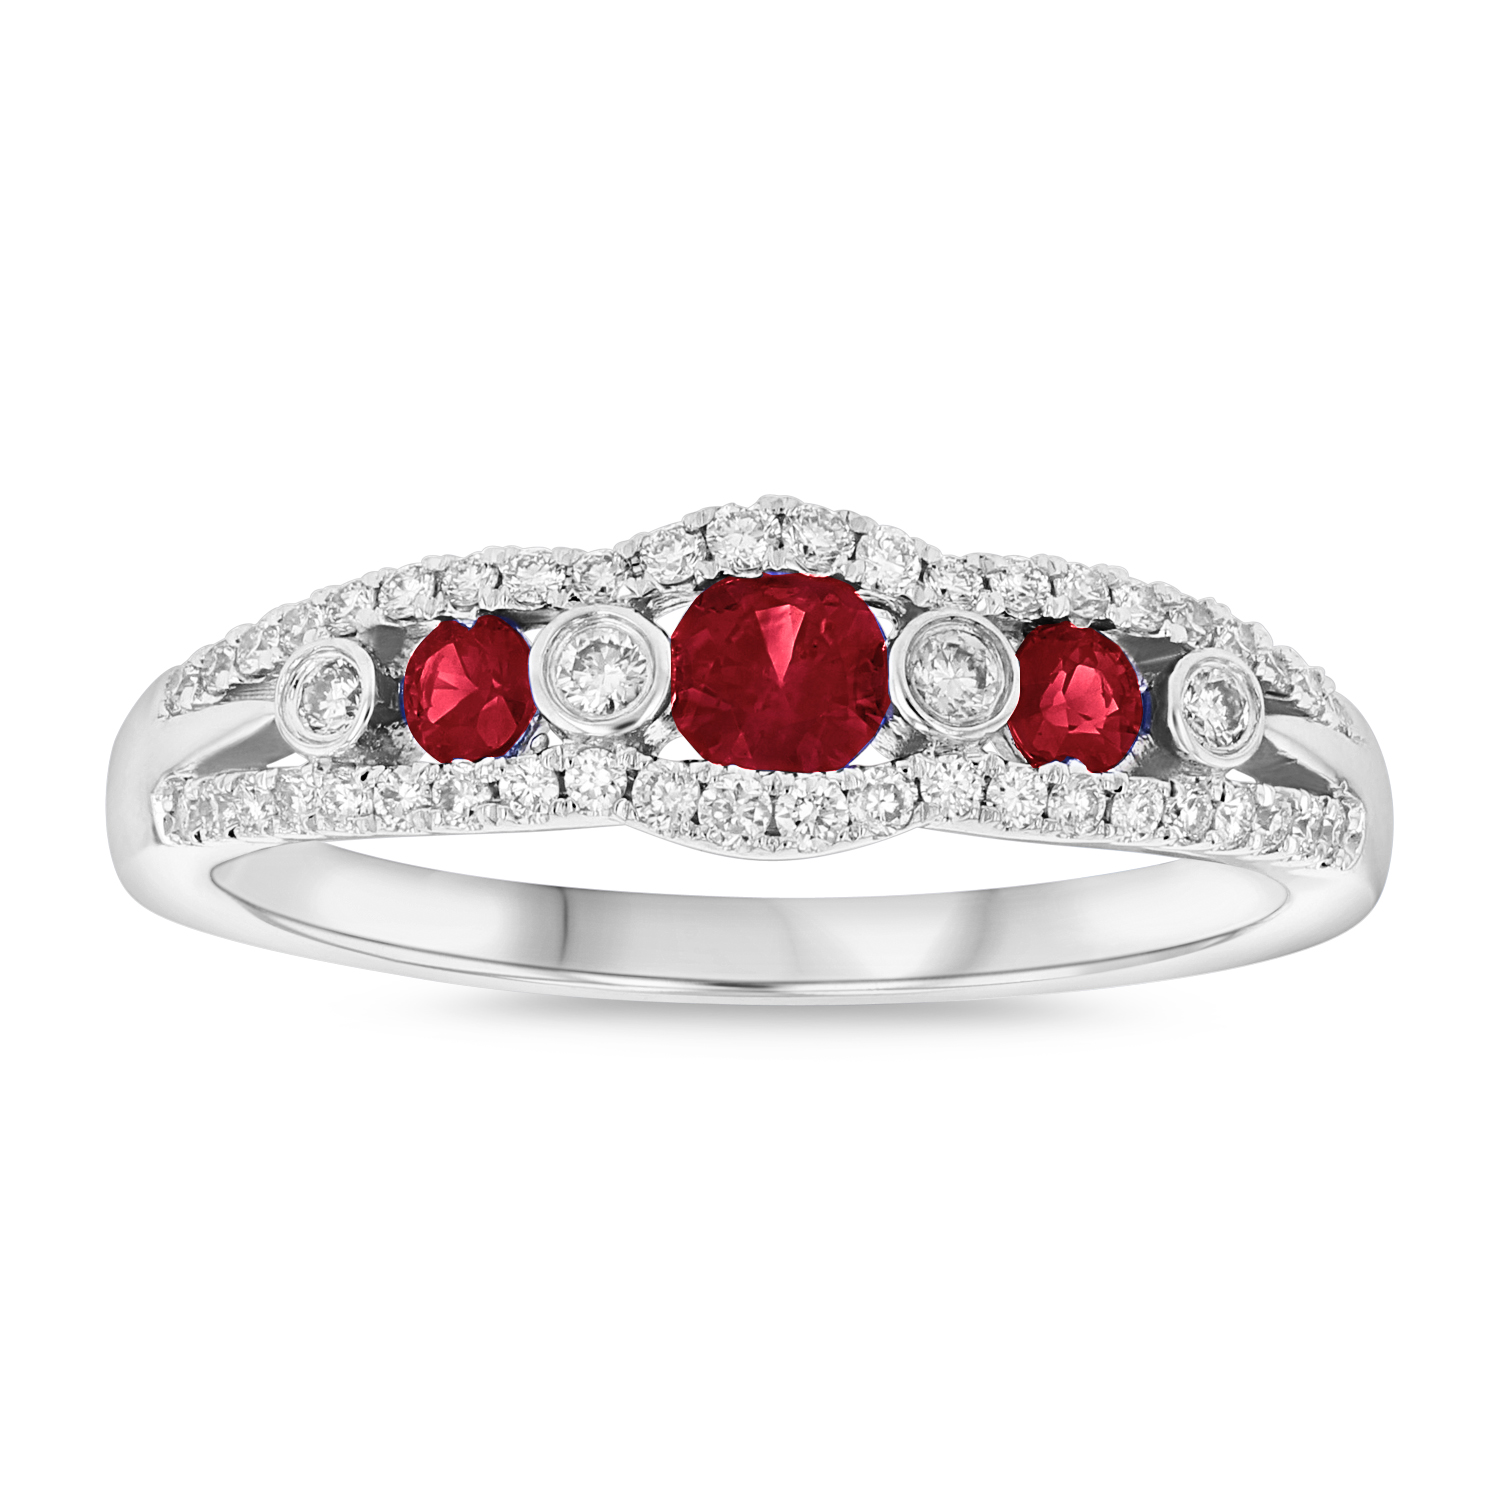 0.61ctw Ruby and Diamond Ring in 14k White Gold